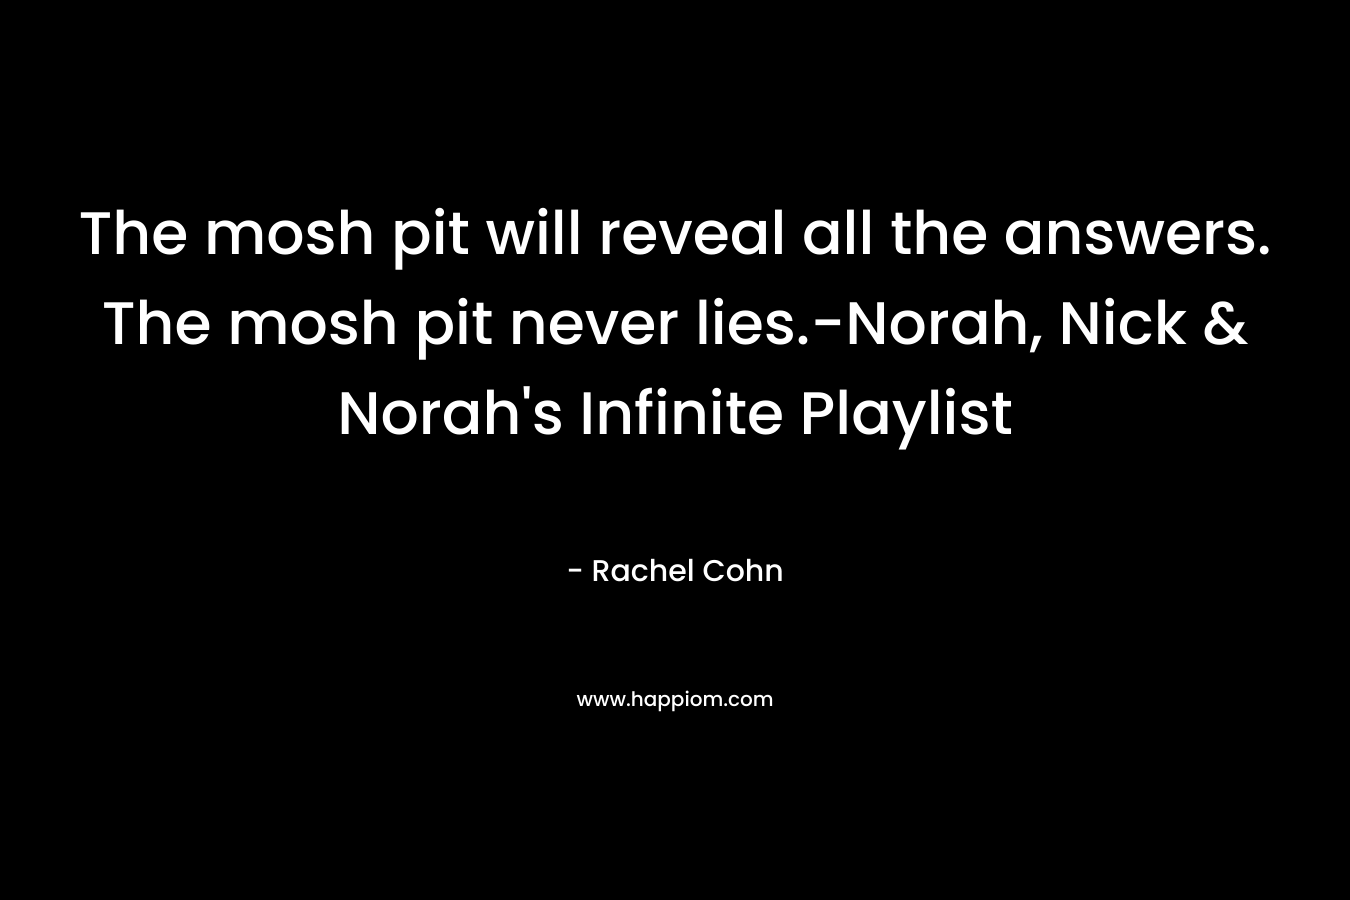 The mosh pit will reveal all the answers. The mosh pit never lies.-Norah, Nick & Norah’s Infinite Playlist  – Rachel Cohn